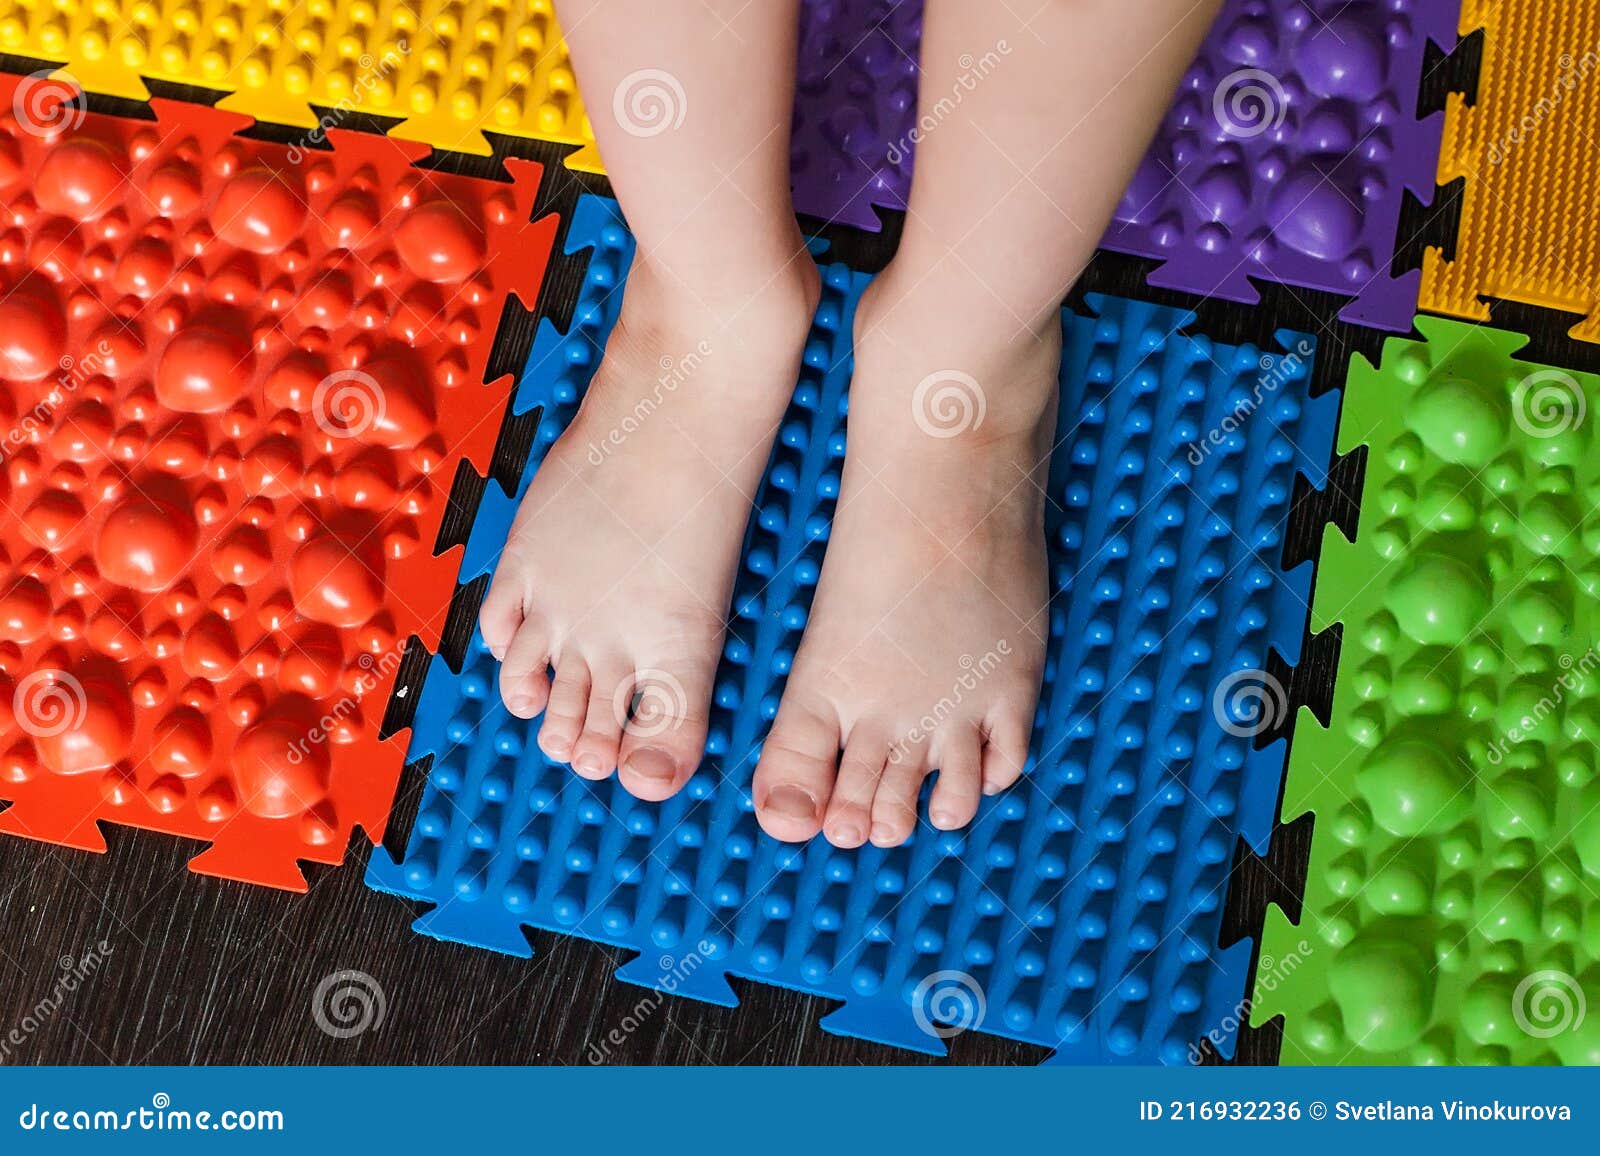 Puzzle foot